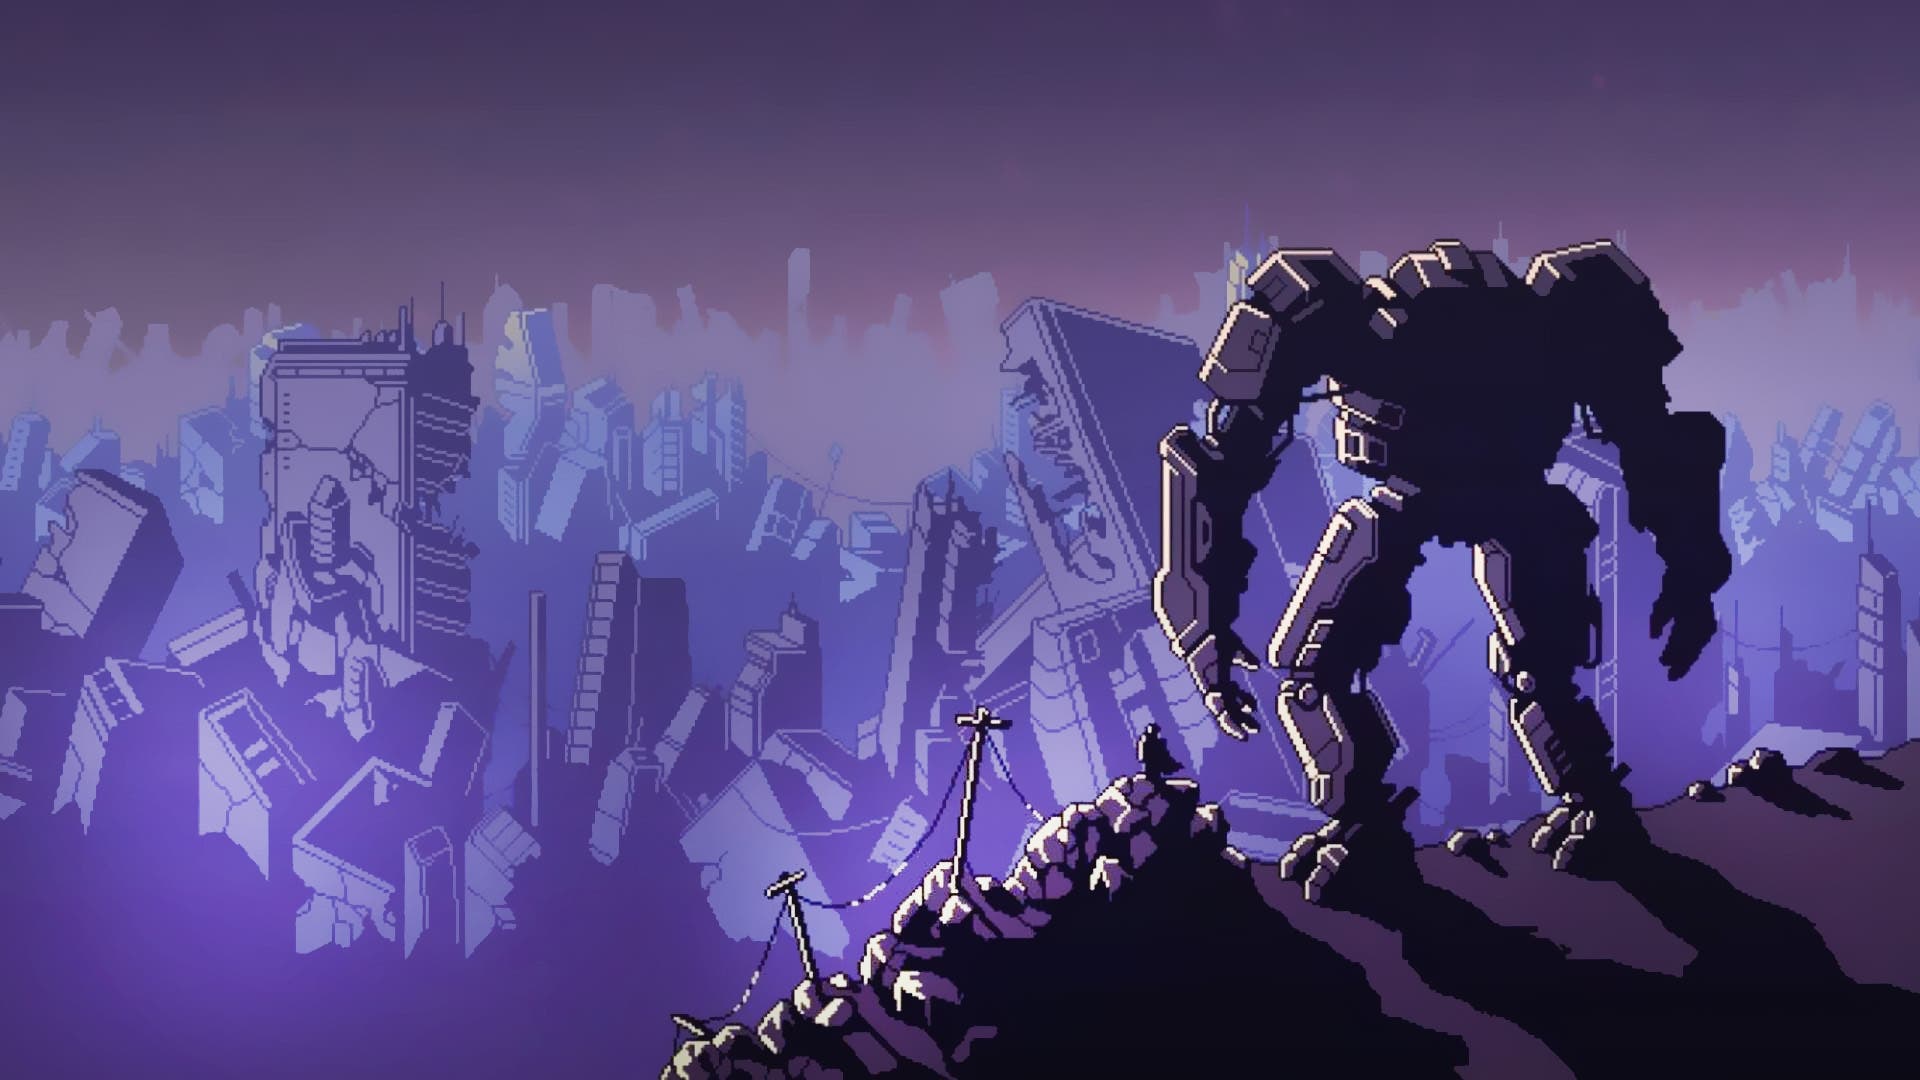 free download into the breach game